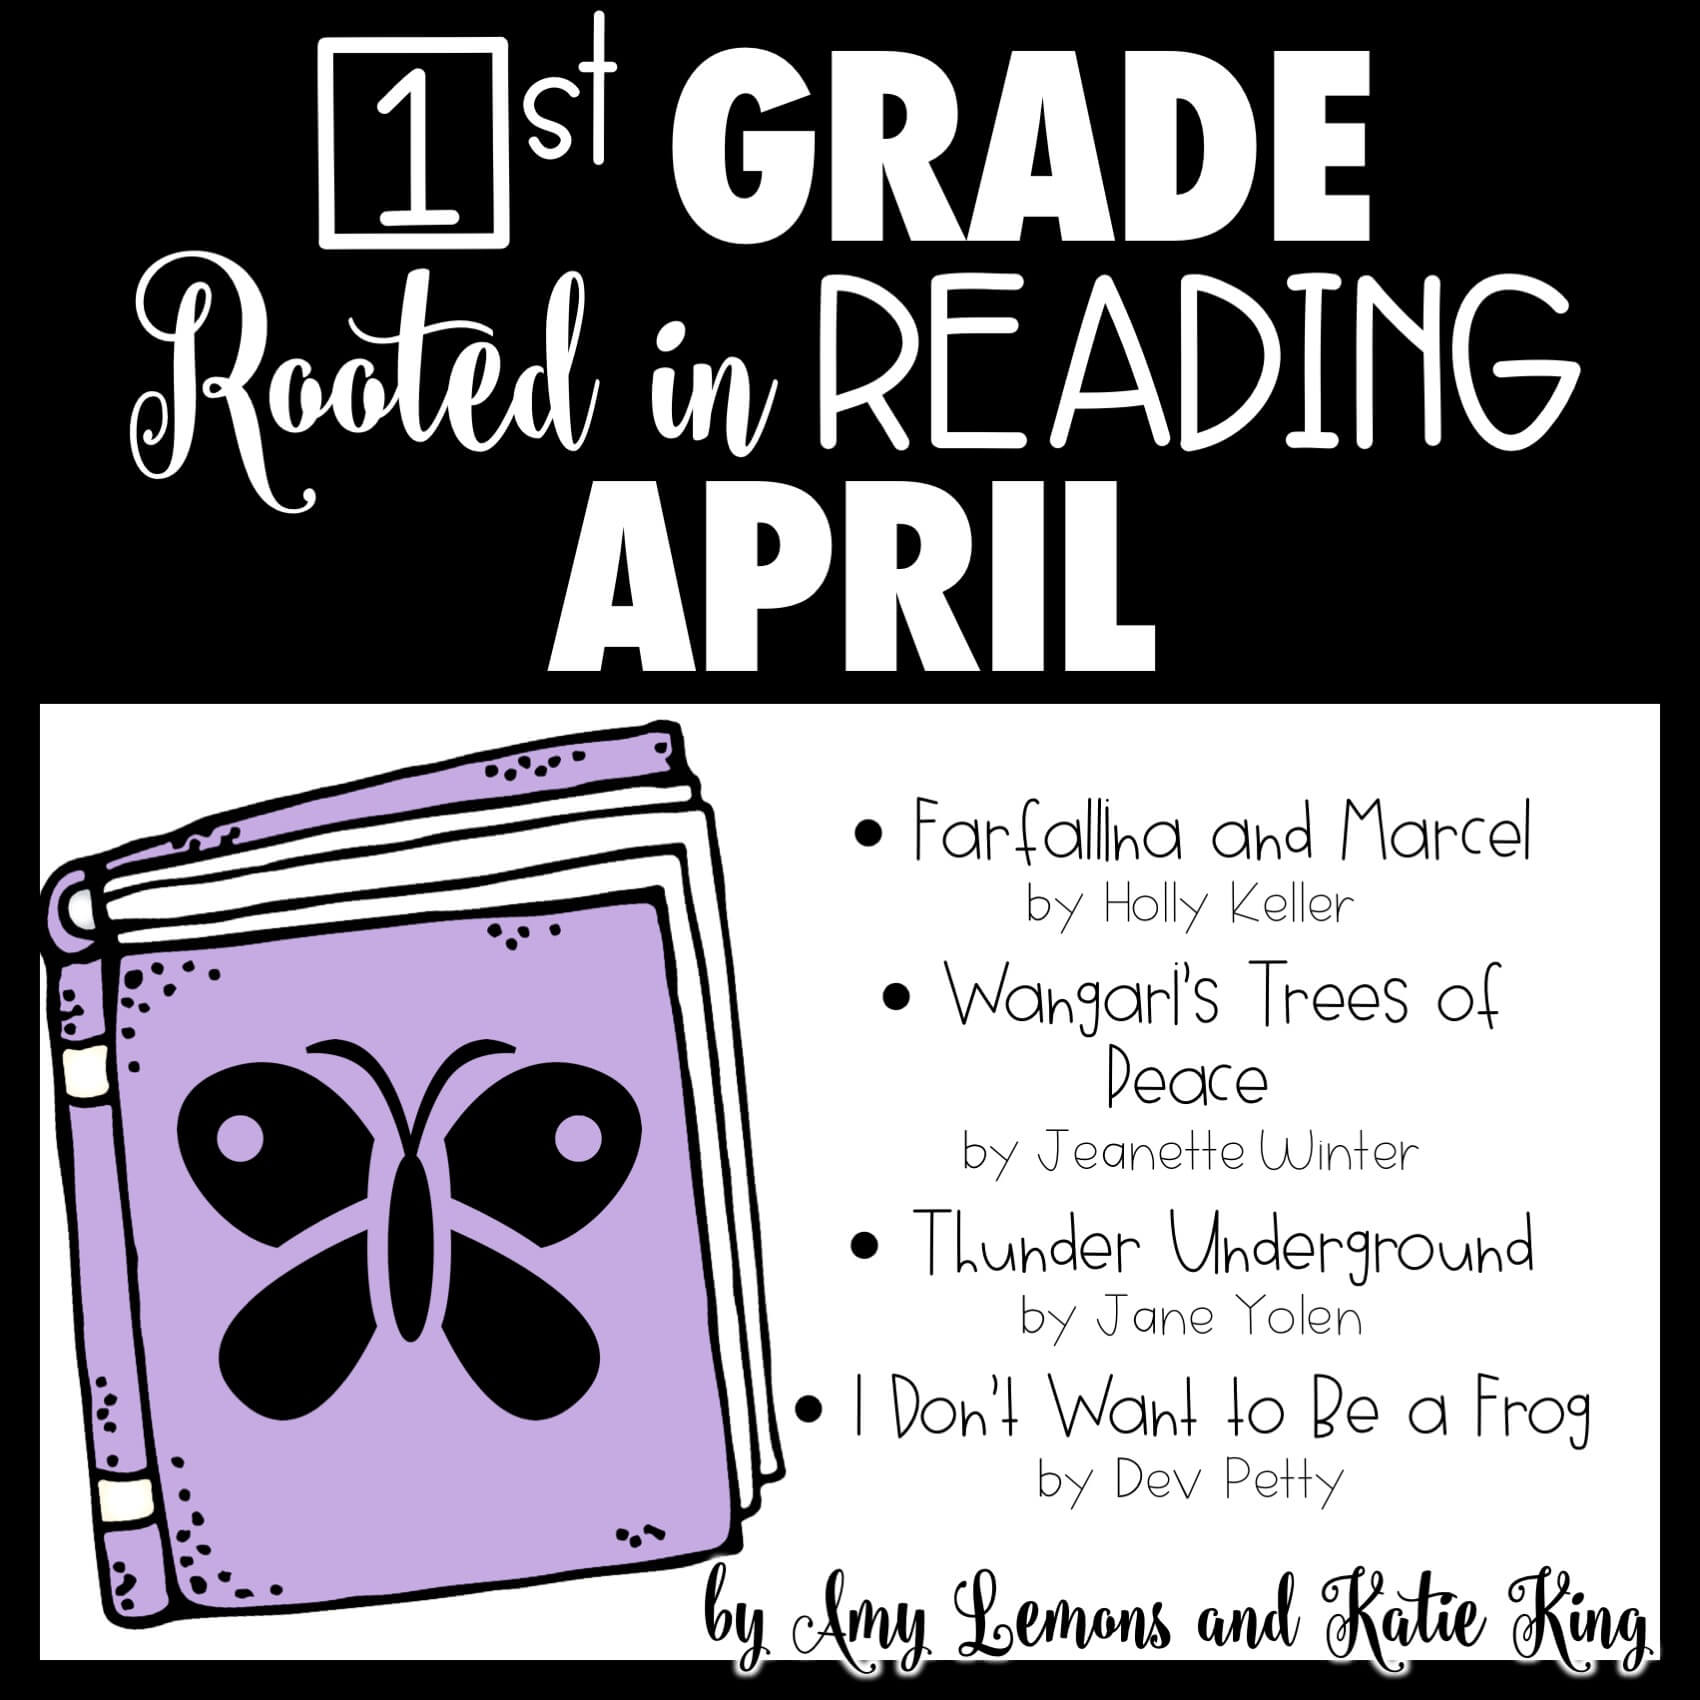 1st Grade Rooted in Reading April